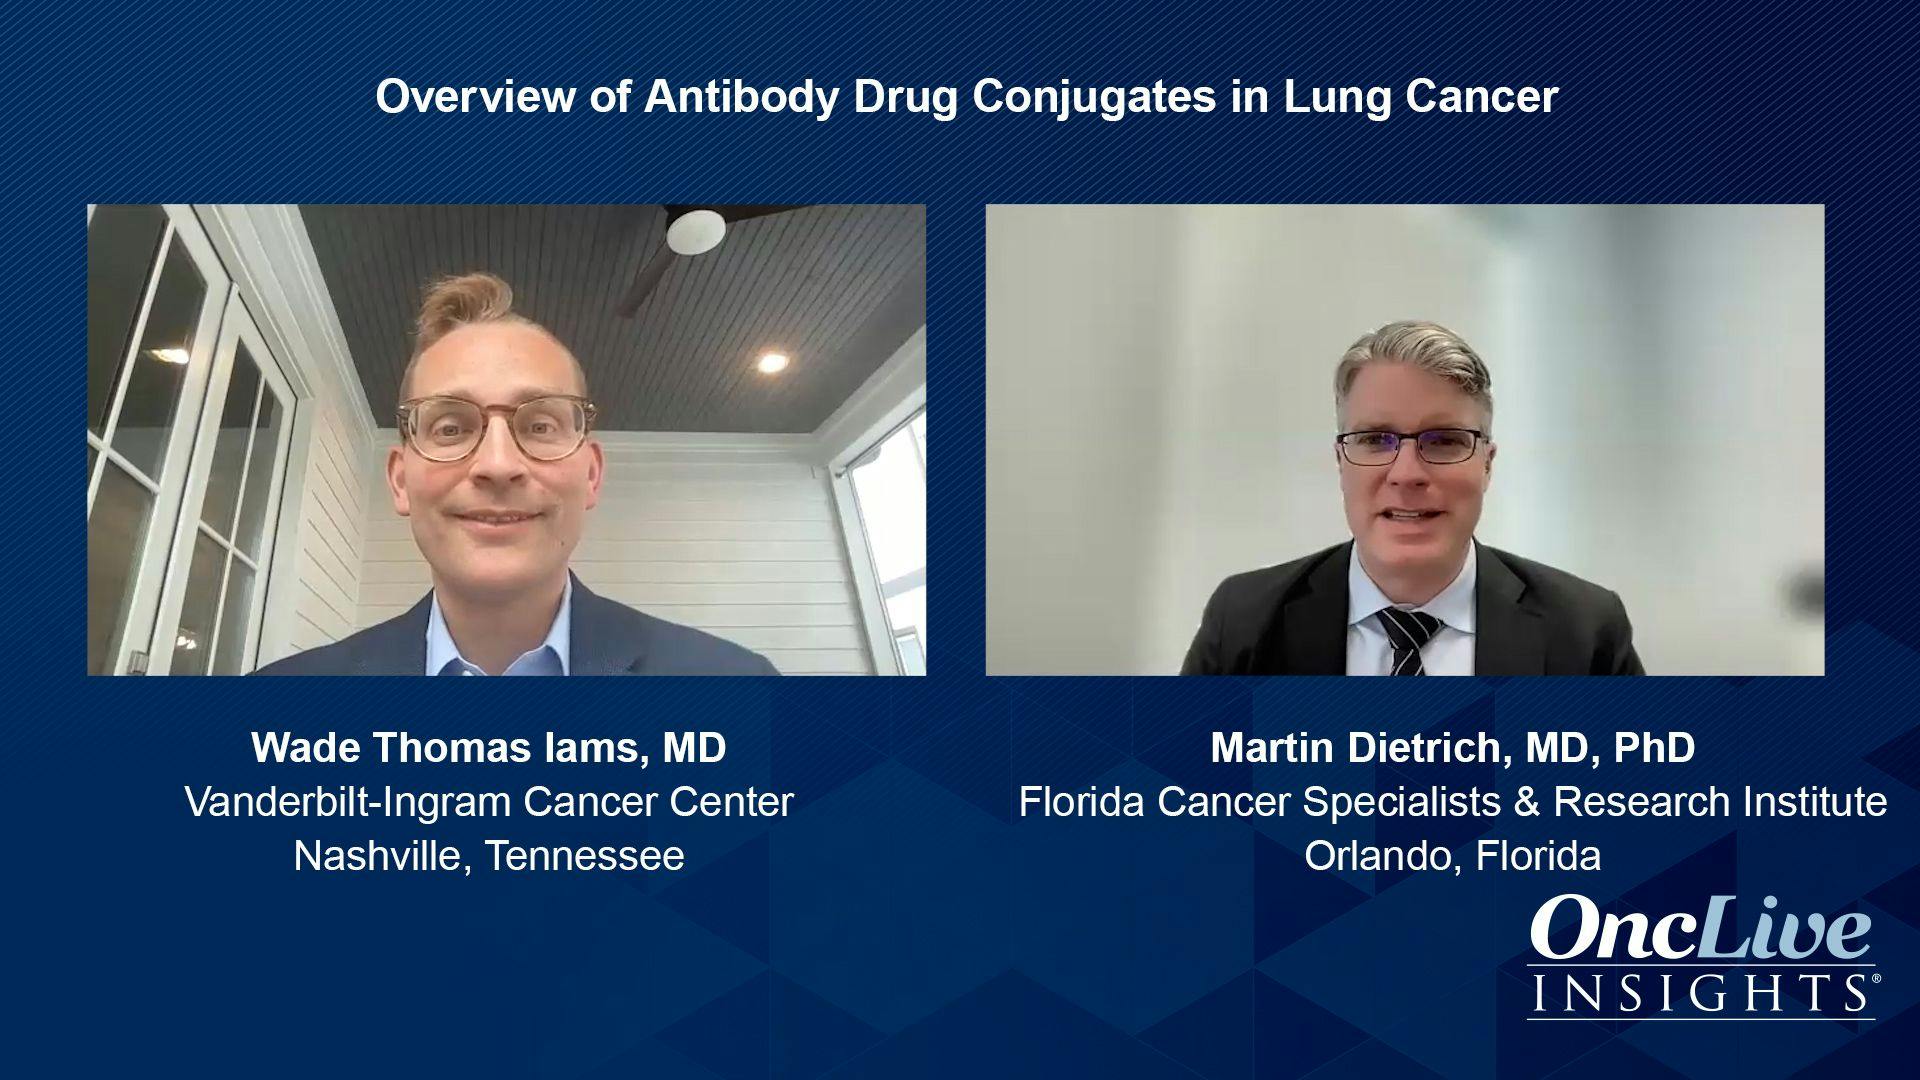 Exploring TROP2 Expression in Patients with NSCLC